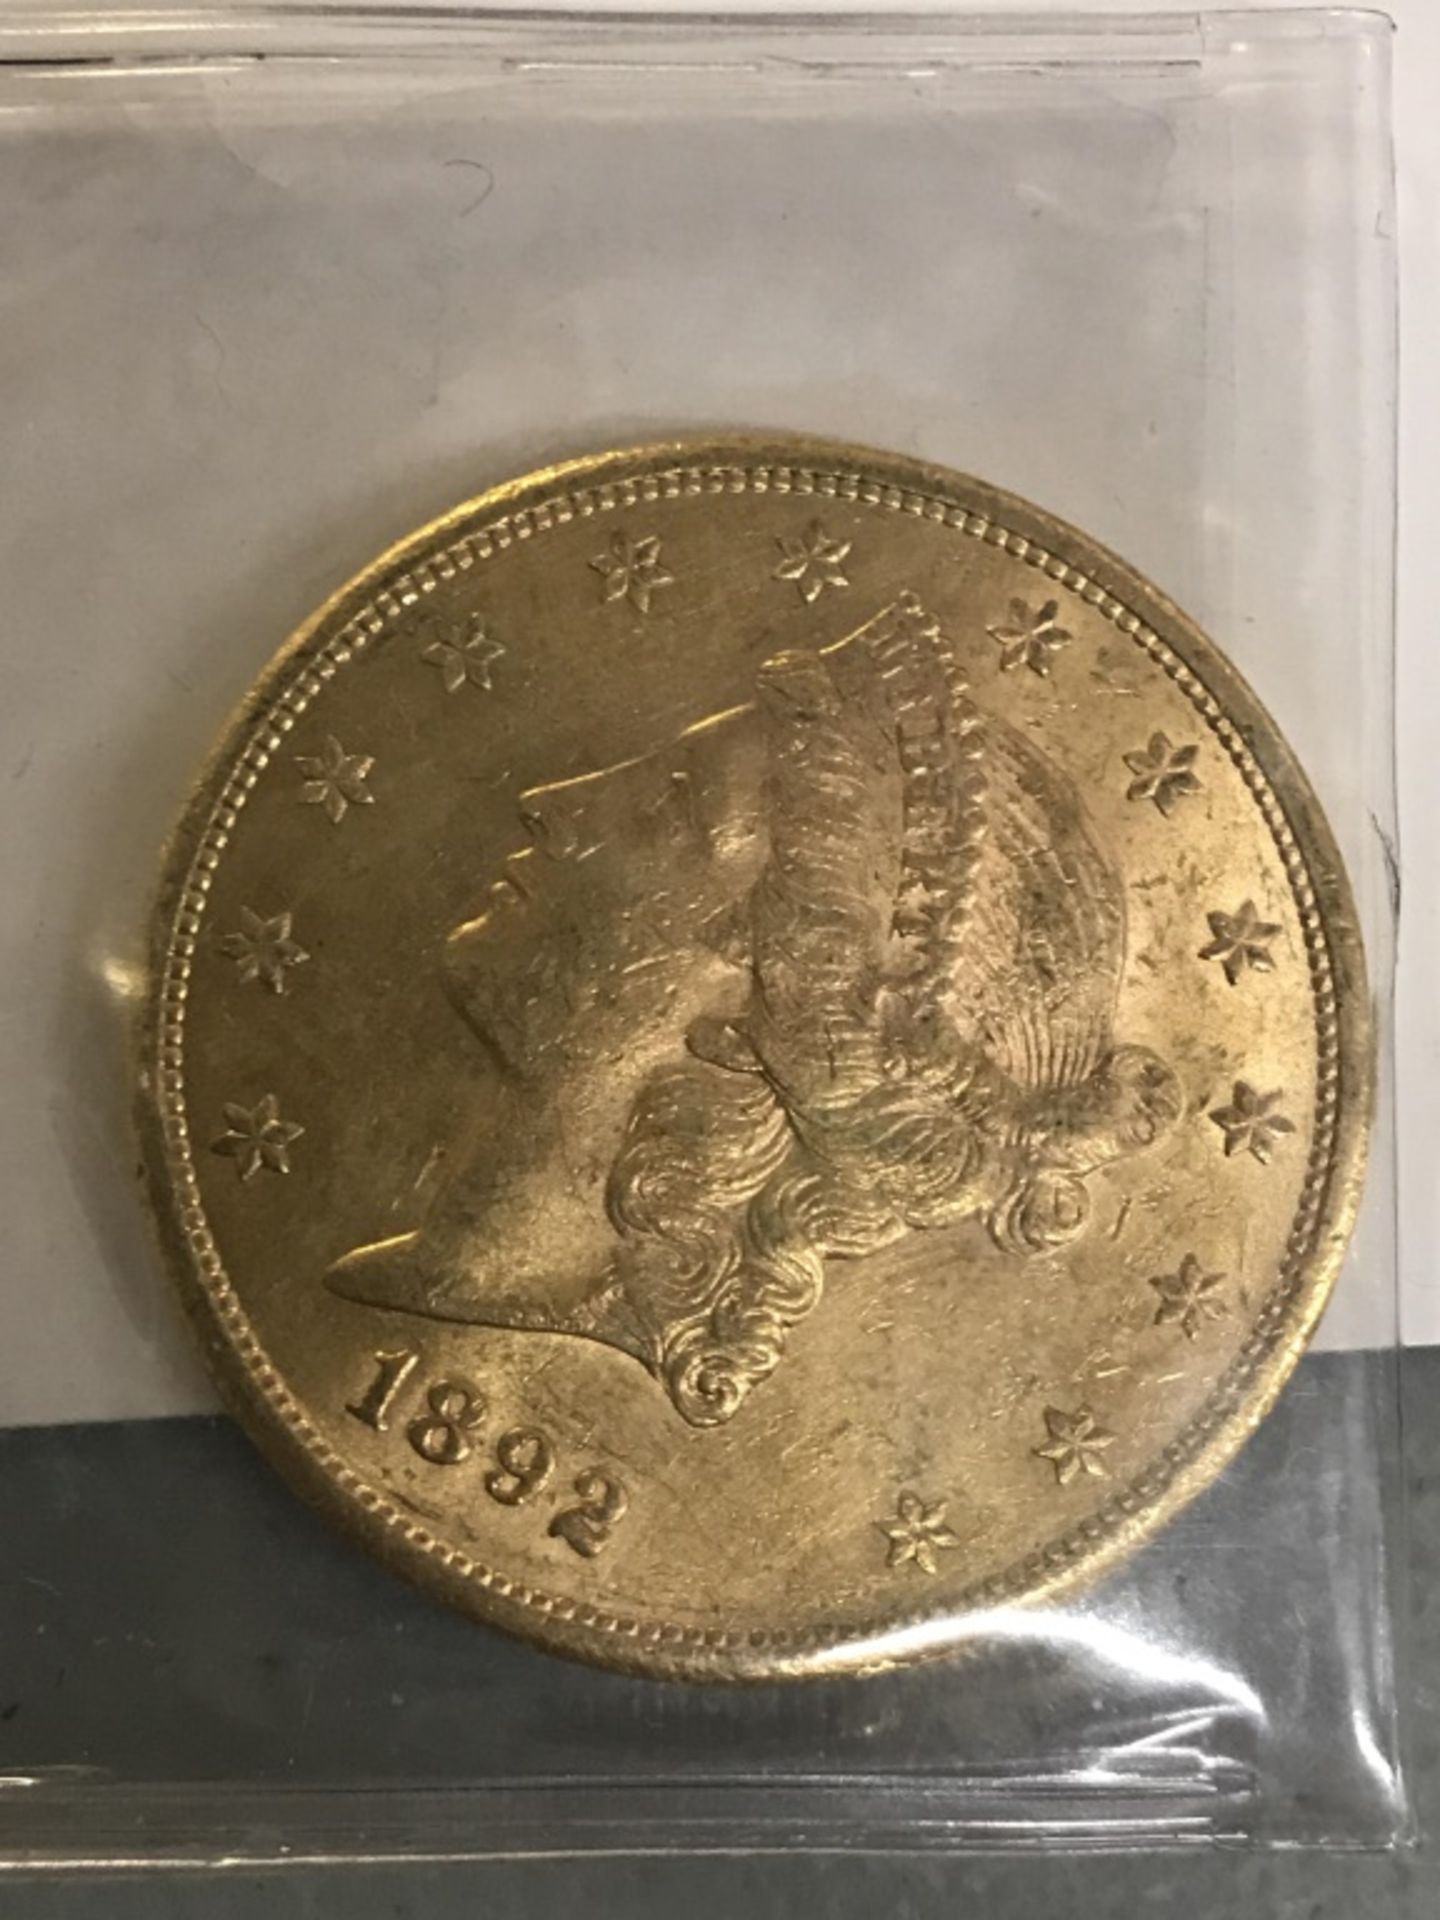 $20 Us Gold 1892 Coin - Image 2 of 9